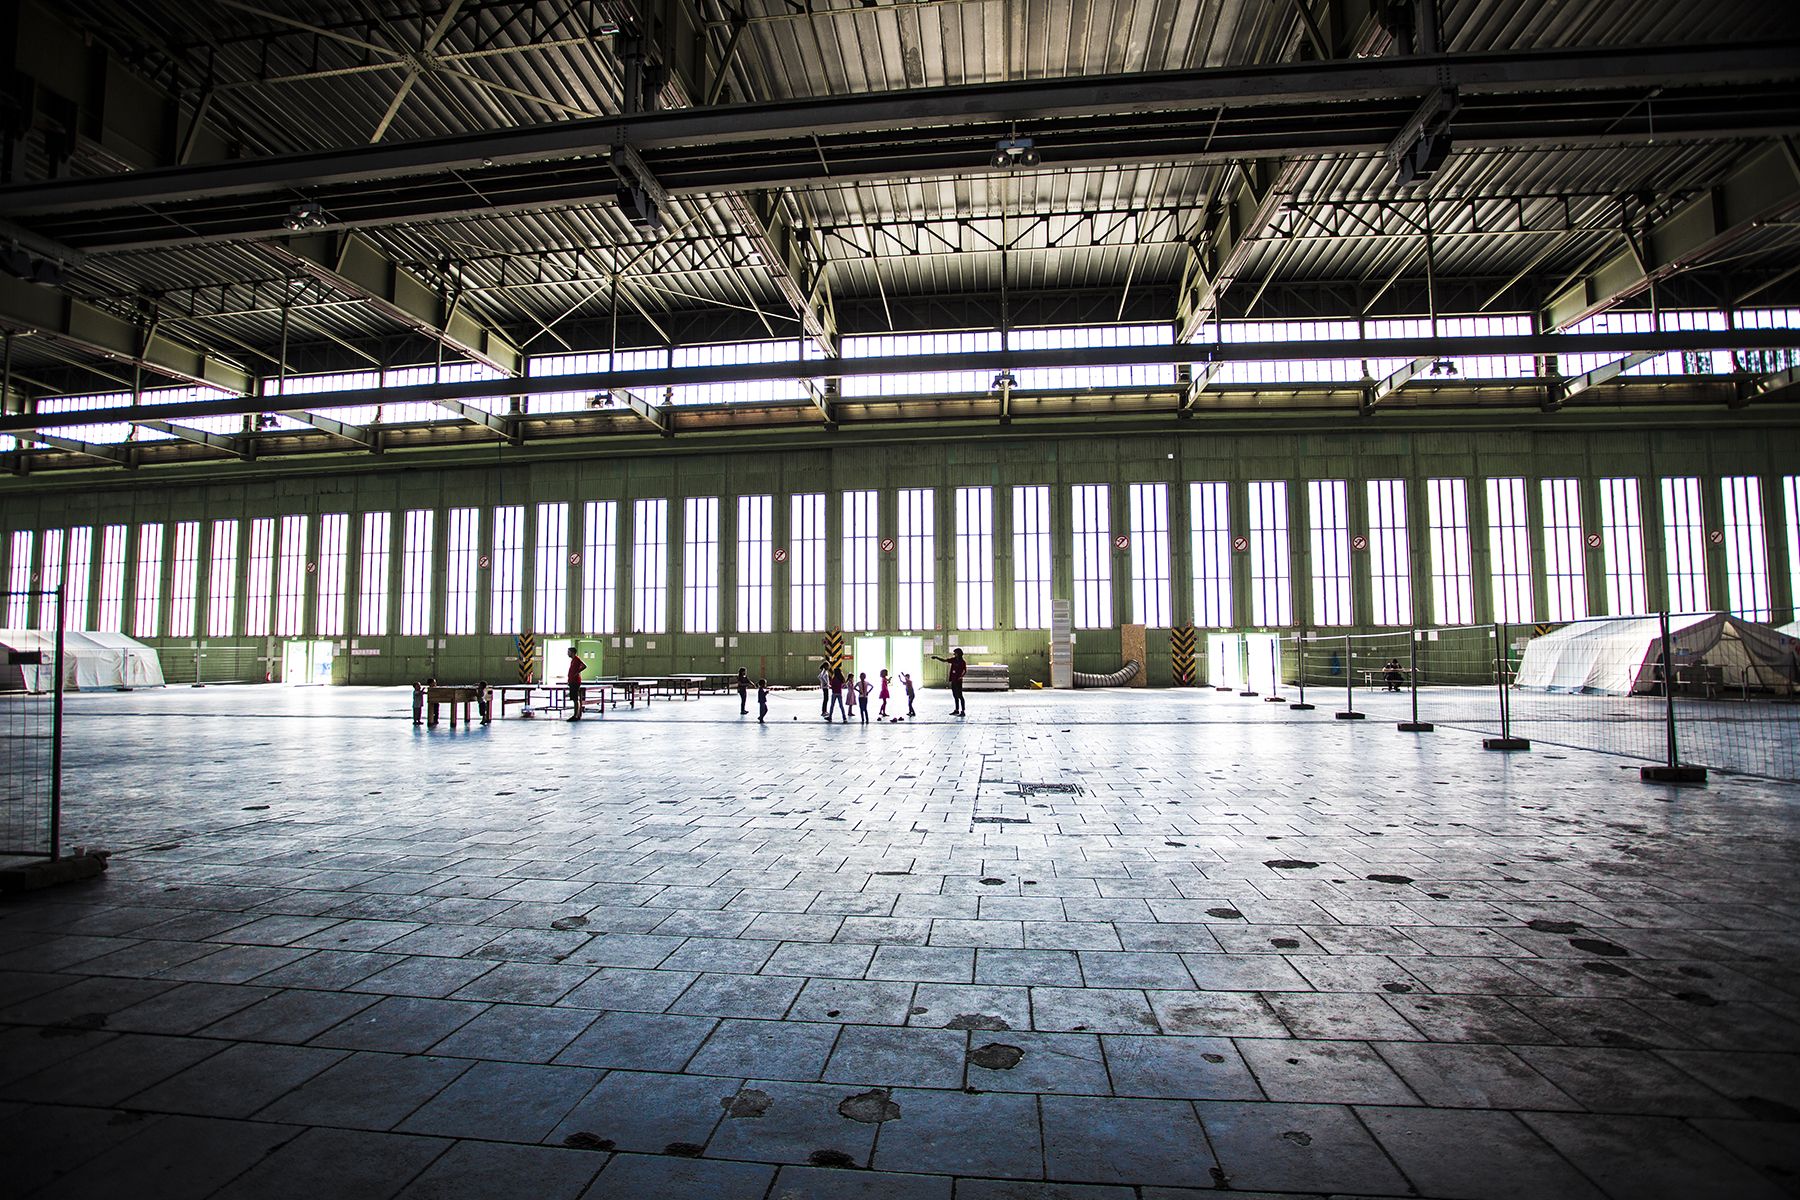 Children play in a hanger in Tempelhof airport, once a Nazi hanger and now home to over 2000 refugees. Image by Emily Kassie. Germany, 2016.